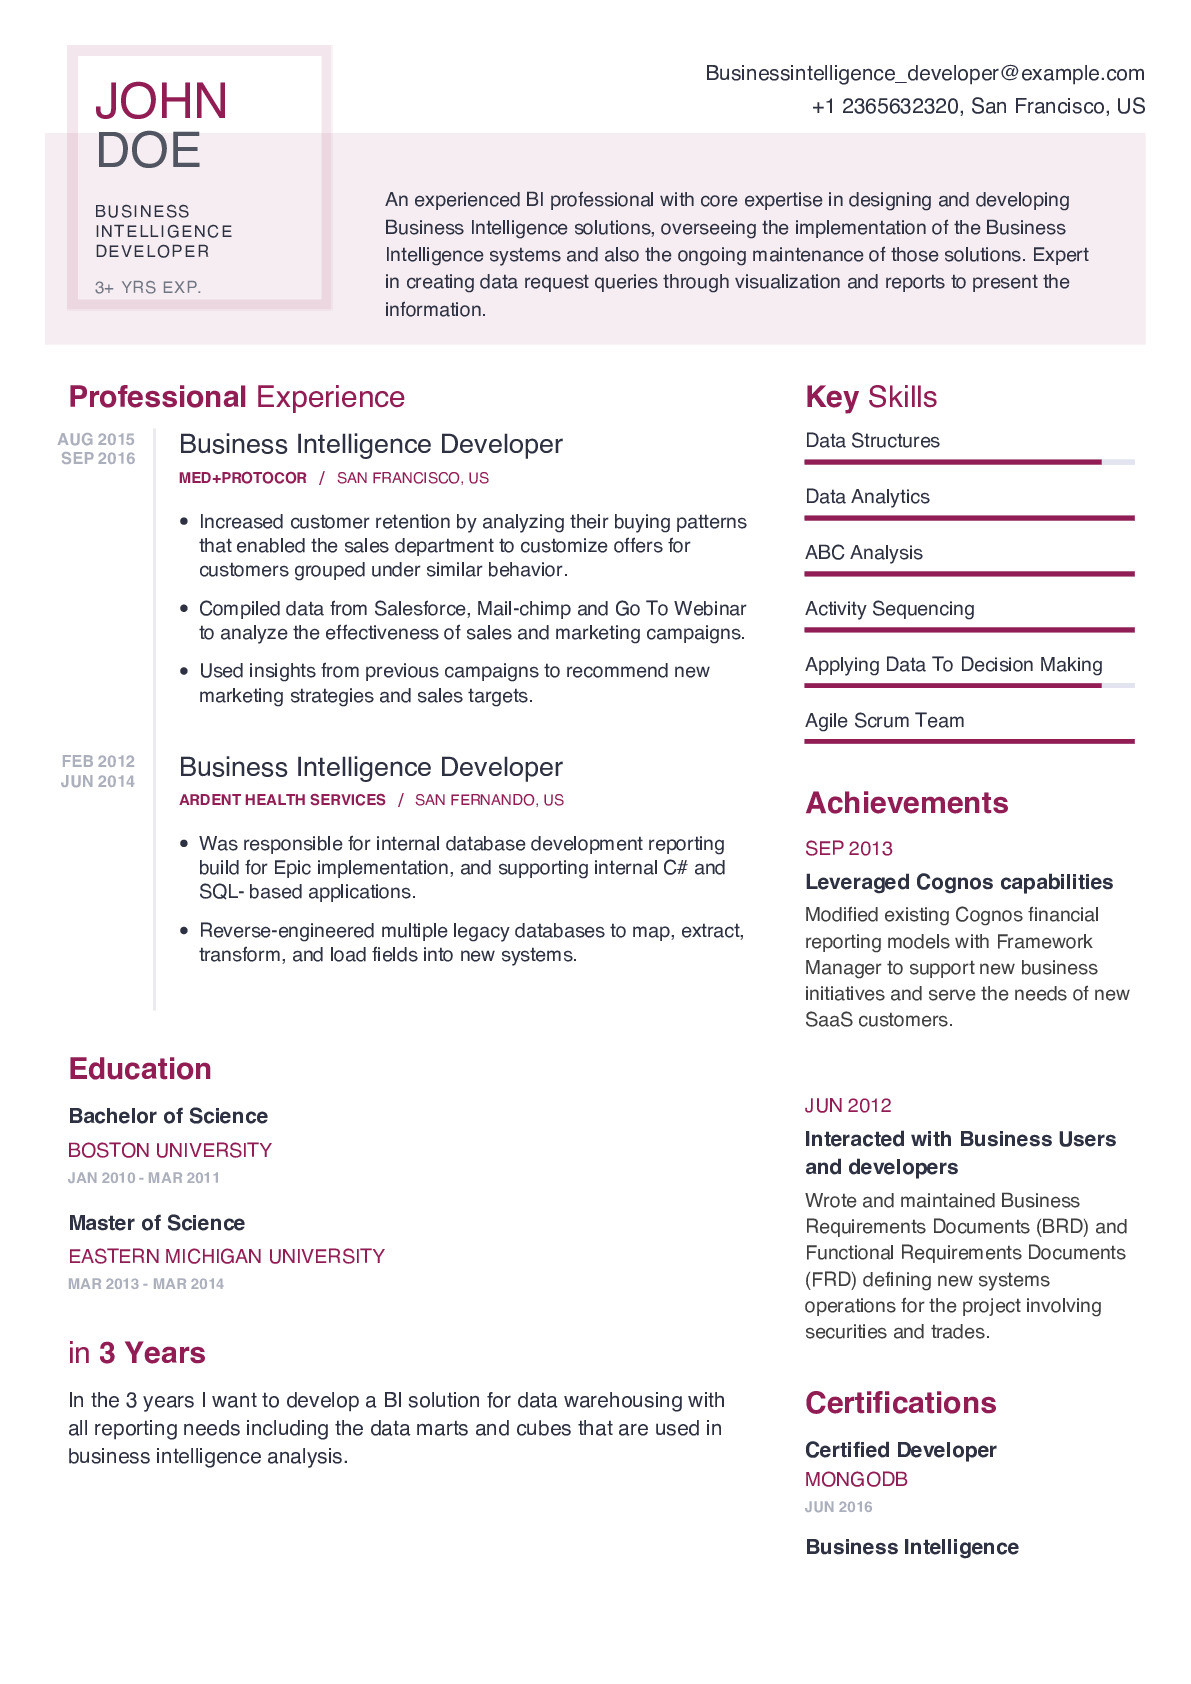 Sample Resume for Experienced Business Intelligence Developer Business Intelligence Developer Resume with Content Sample Craftmycv